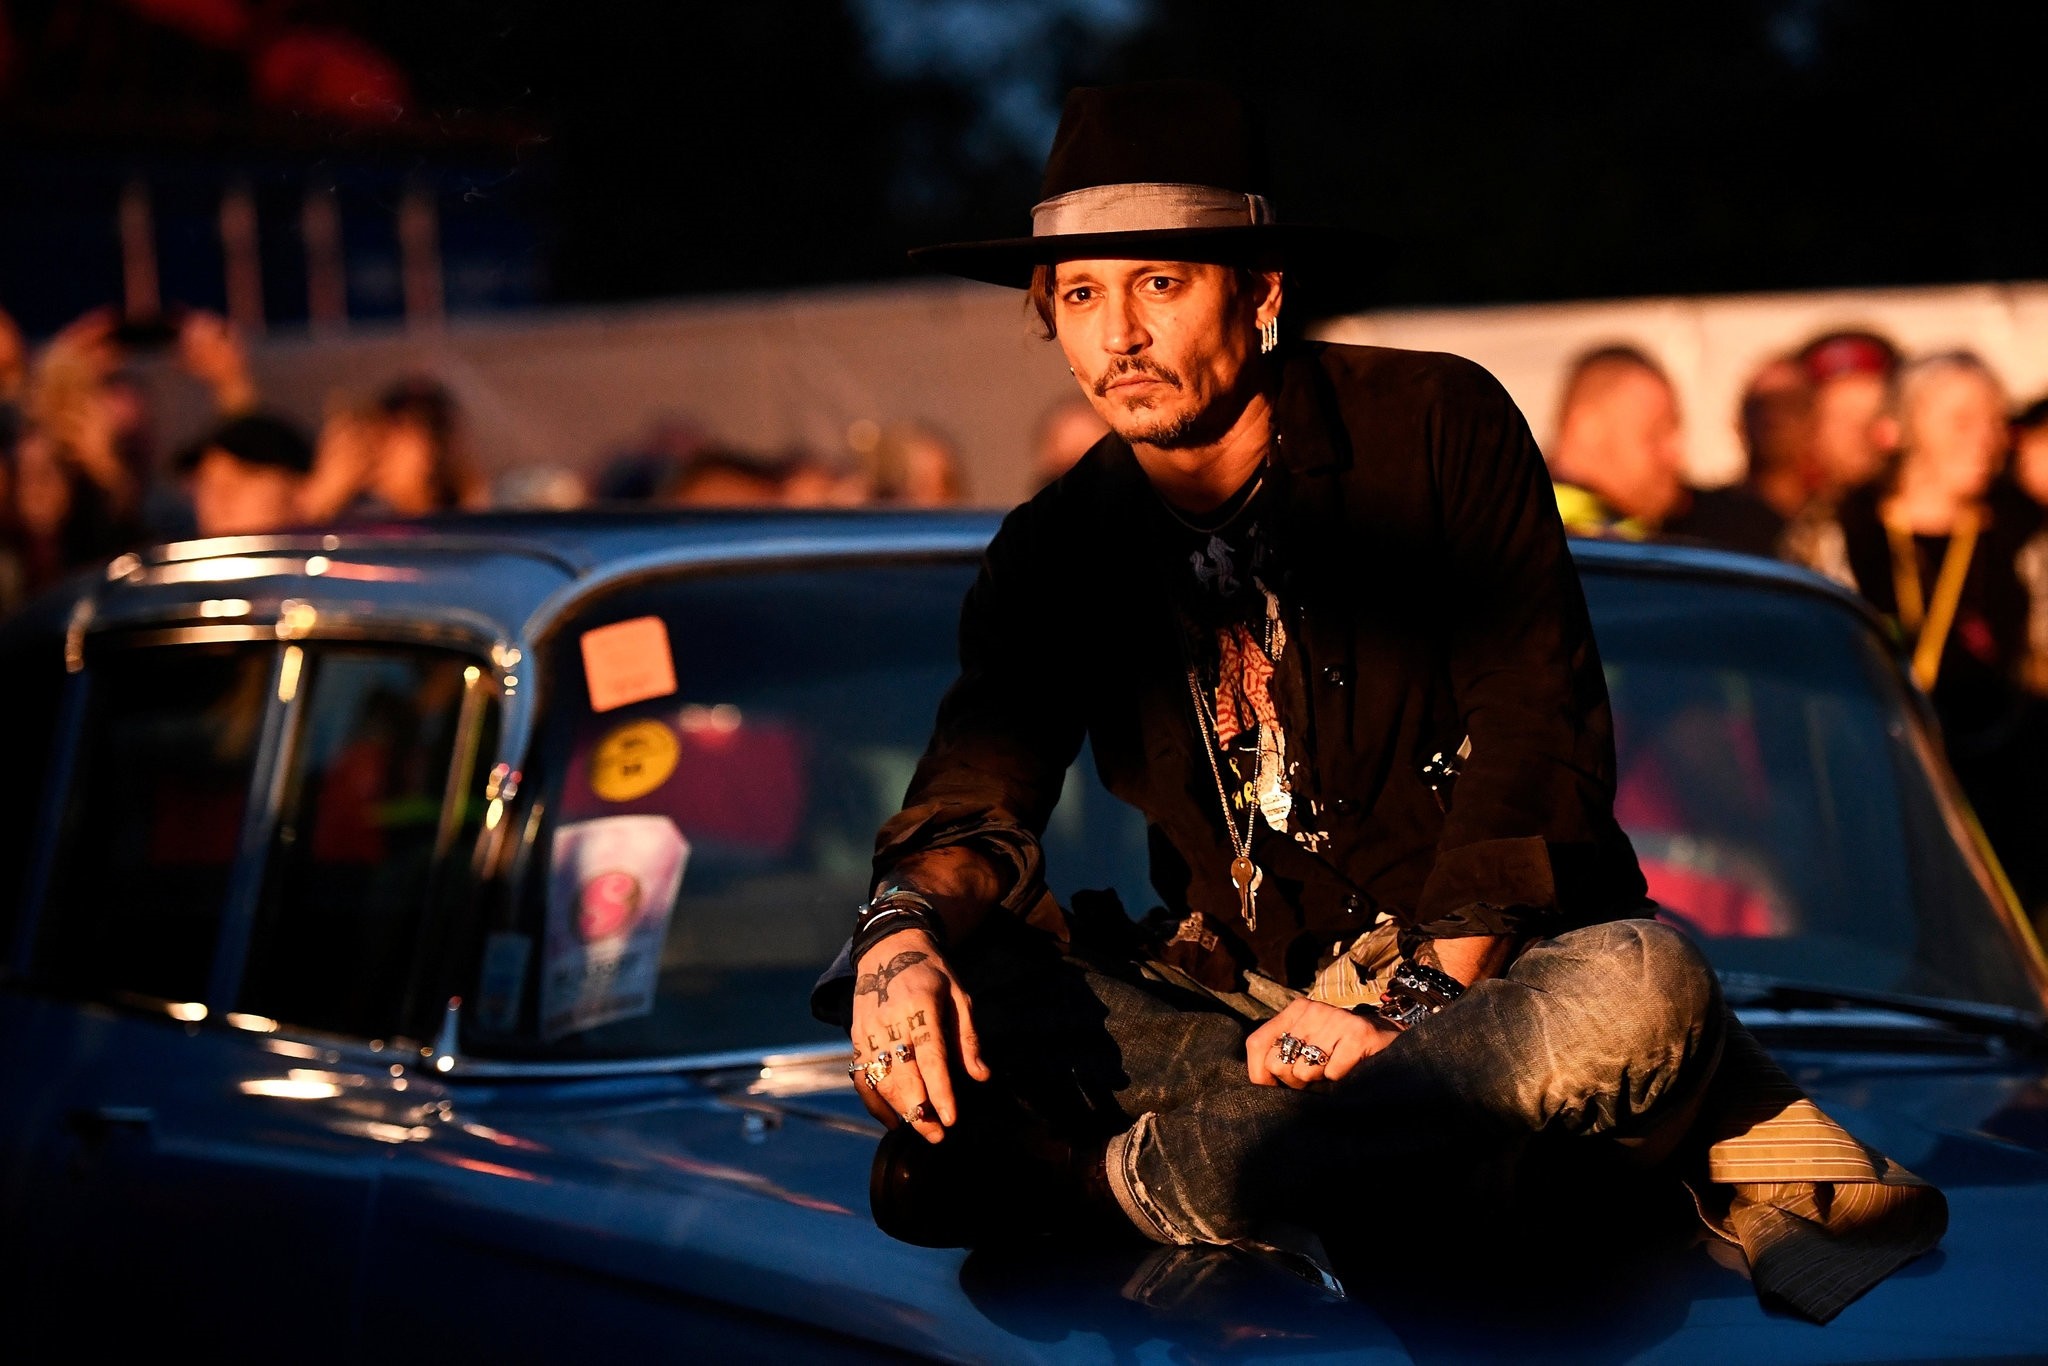 Actor Johnny Depp poses on a Cadillac before presenting his film The Libertine, at Cinemageddon at Worthy Farm in Somerset during the Glastonbury Festival in Britain, June 22, 2017. (REUTERS Photo)